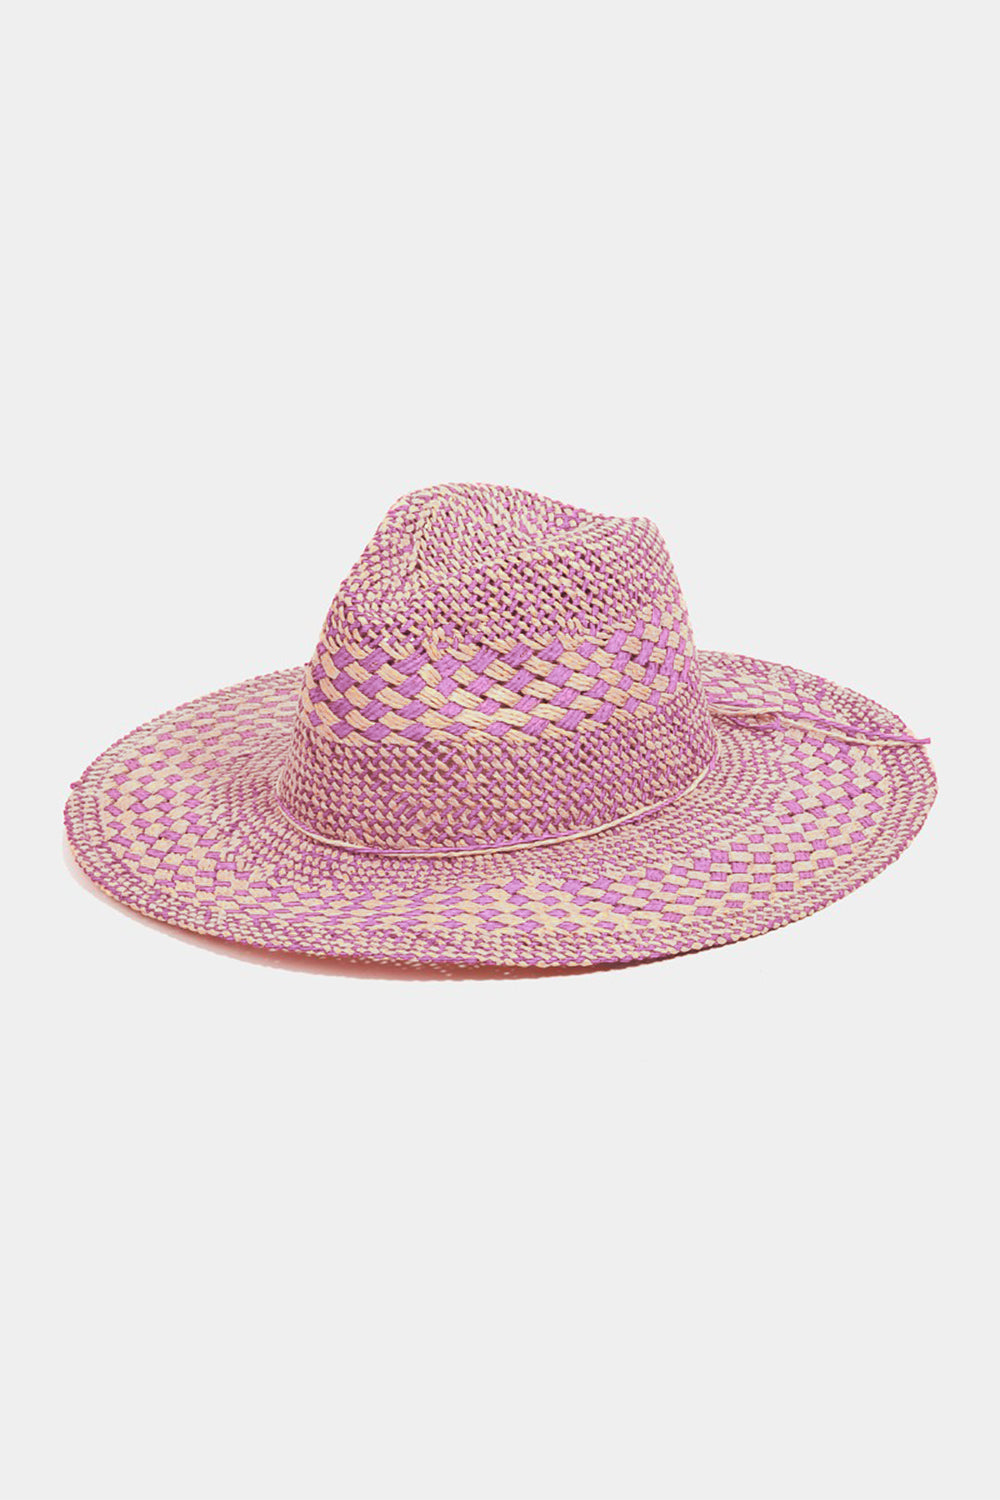 Lavender Fame Checkered Straw Weave Sun Hat Sentient Beauty Fashions *Accessories